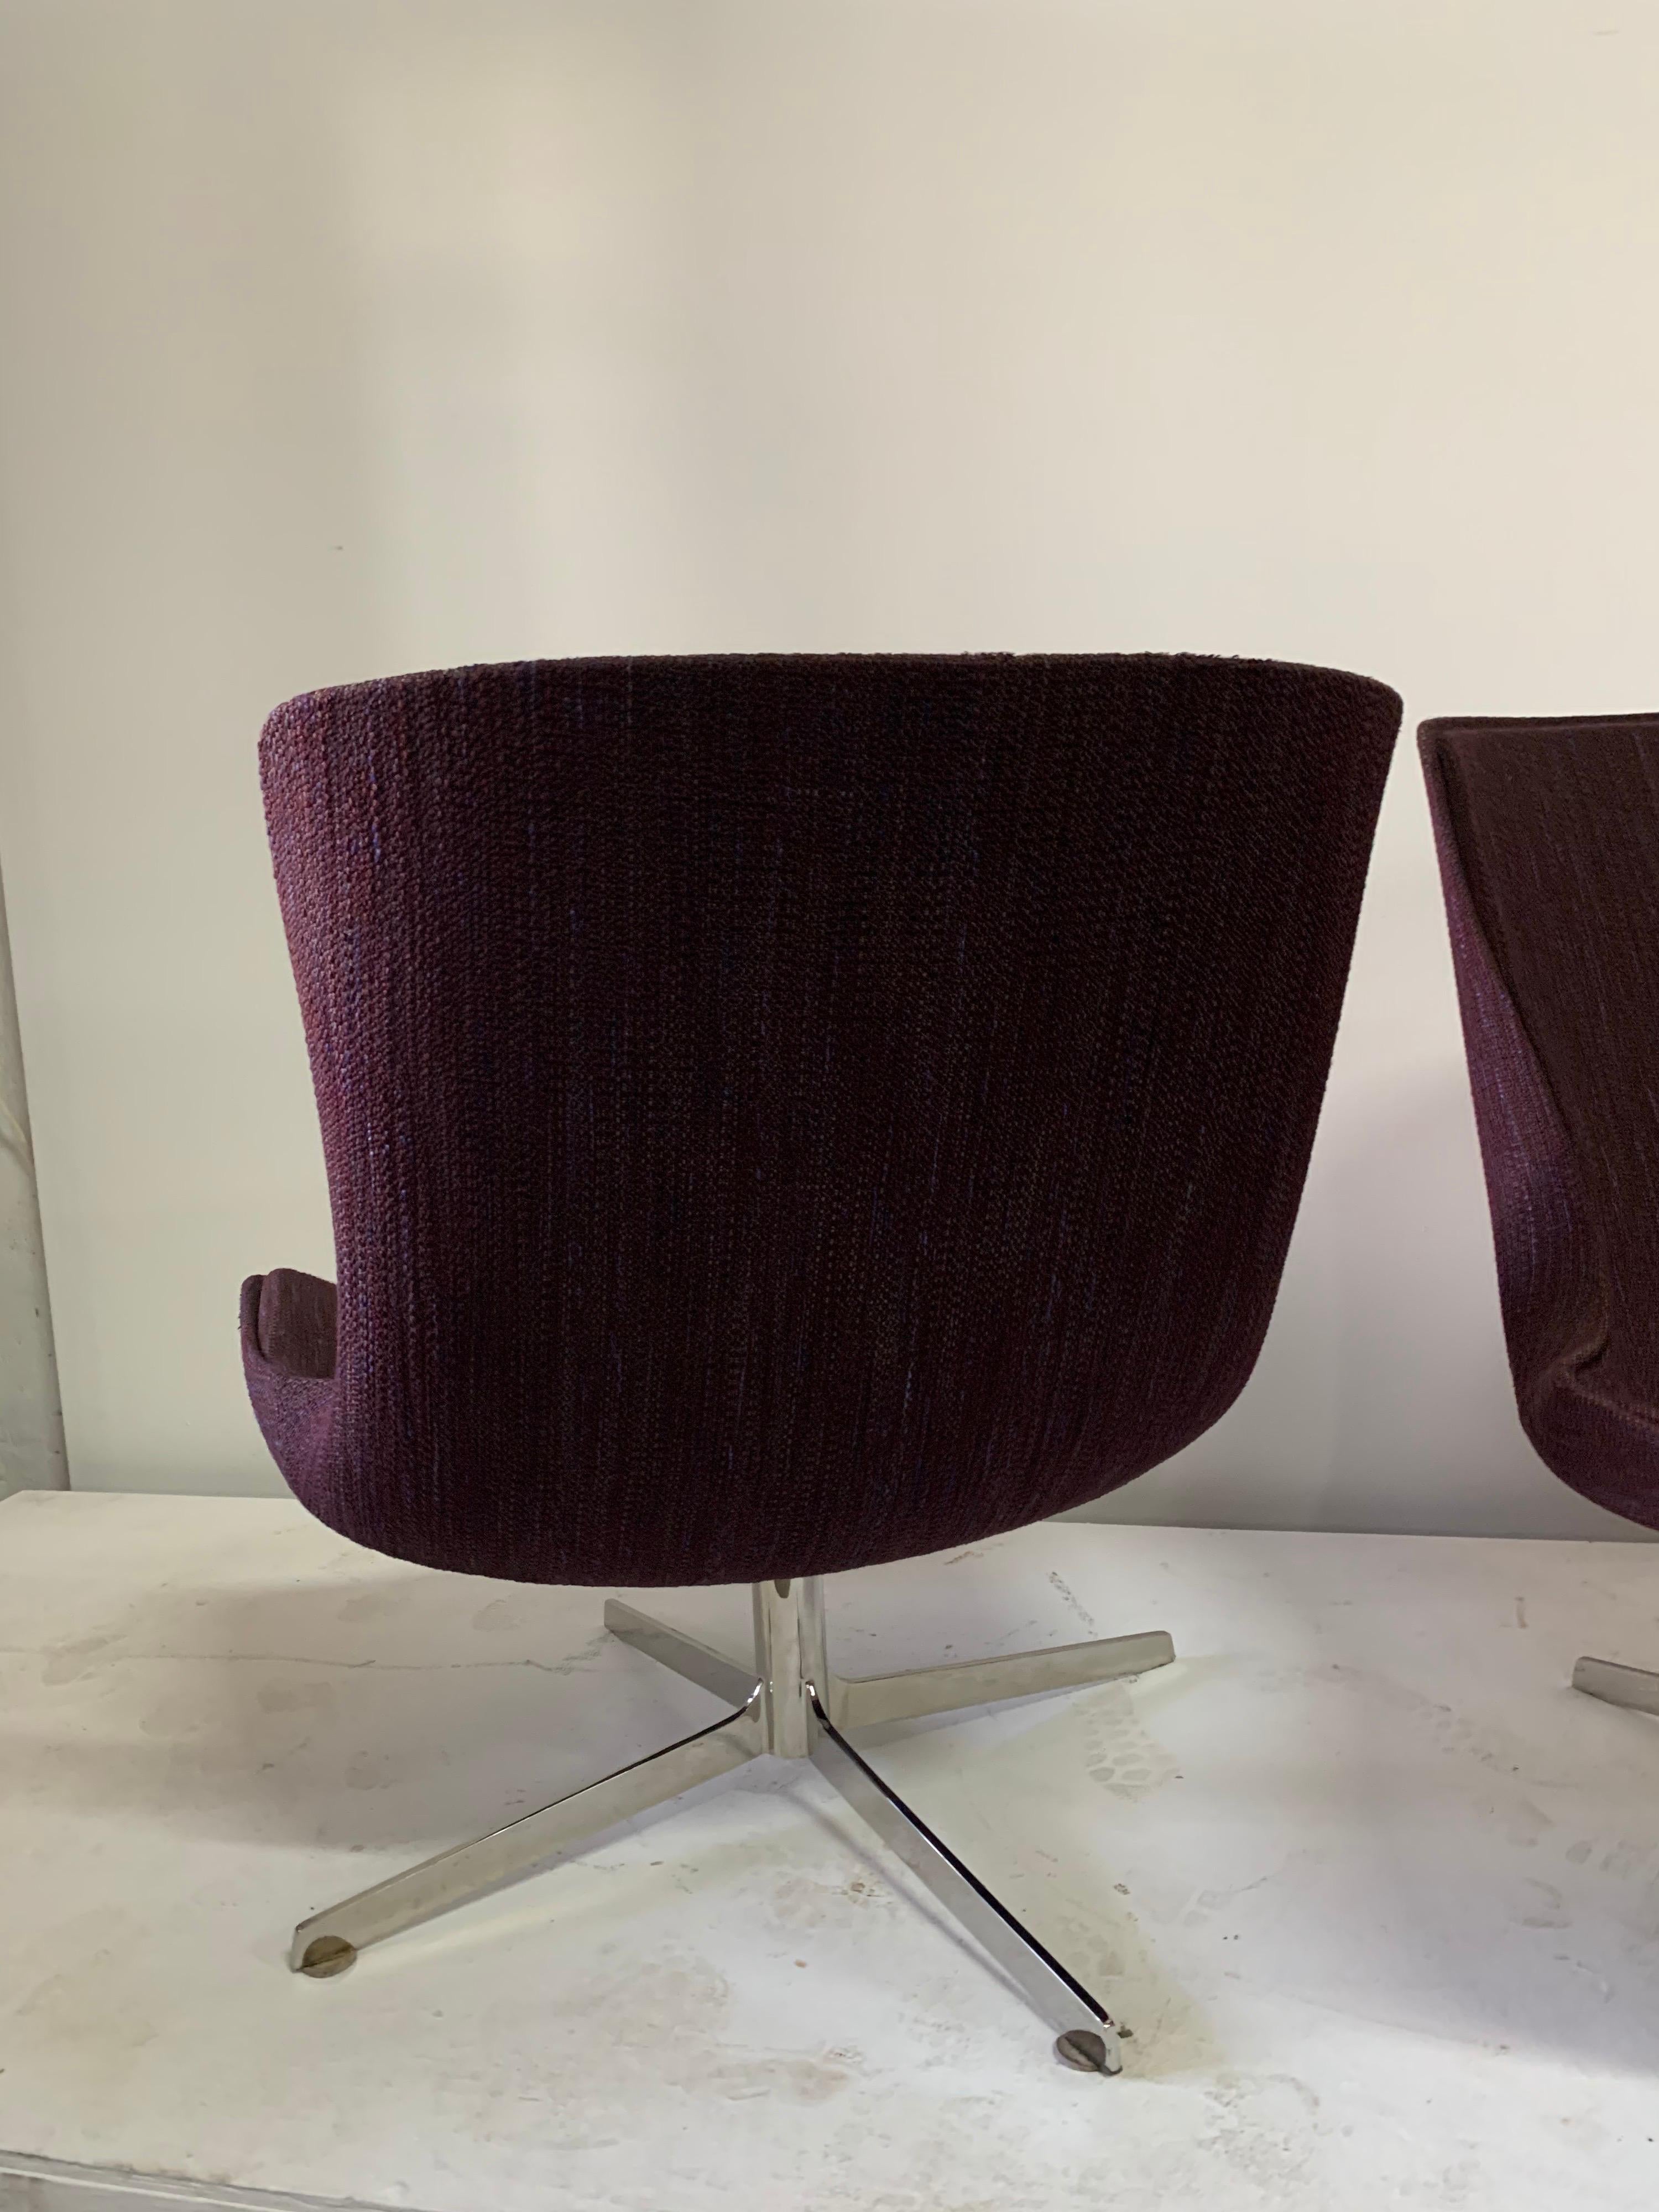 Nicos Zographos Style Midcentury Swivel Chairs, Pair For Sale 3